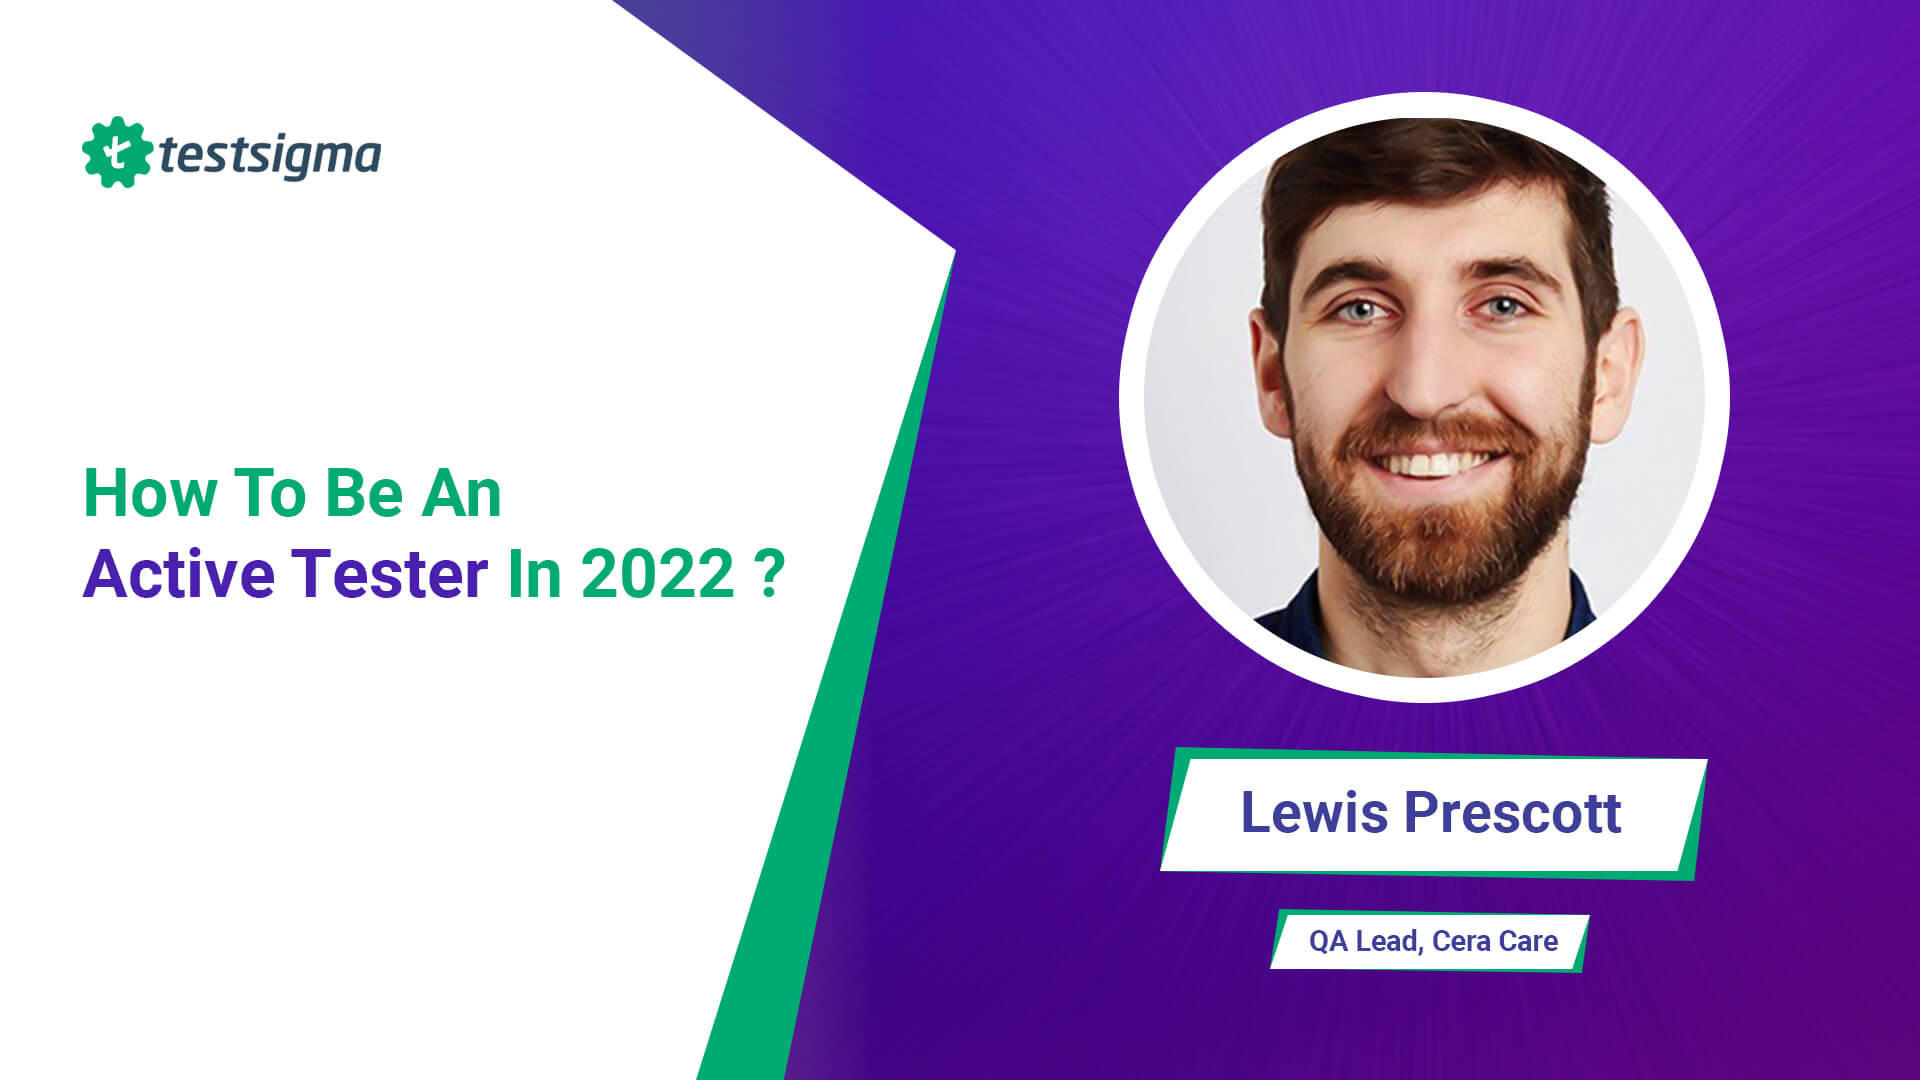 How To Be An Active Tester in 2022?